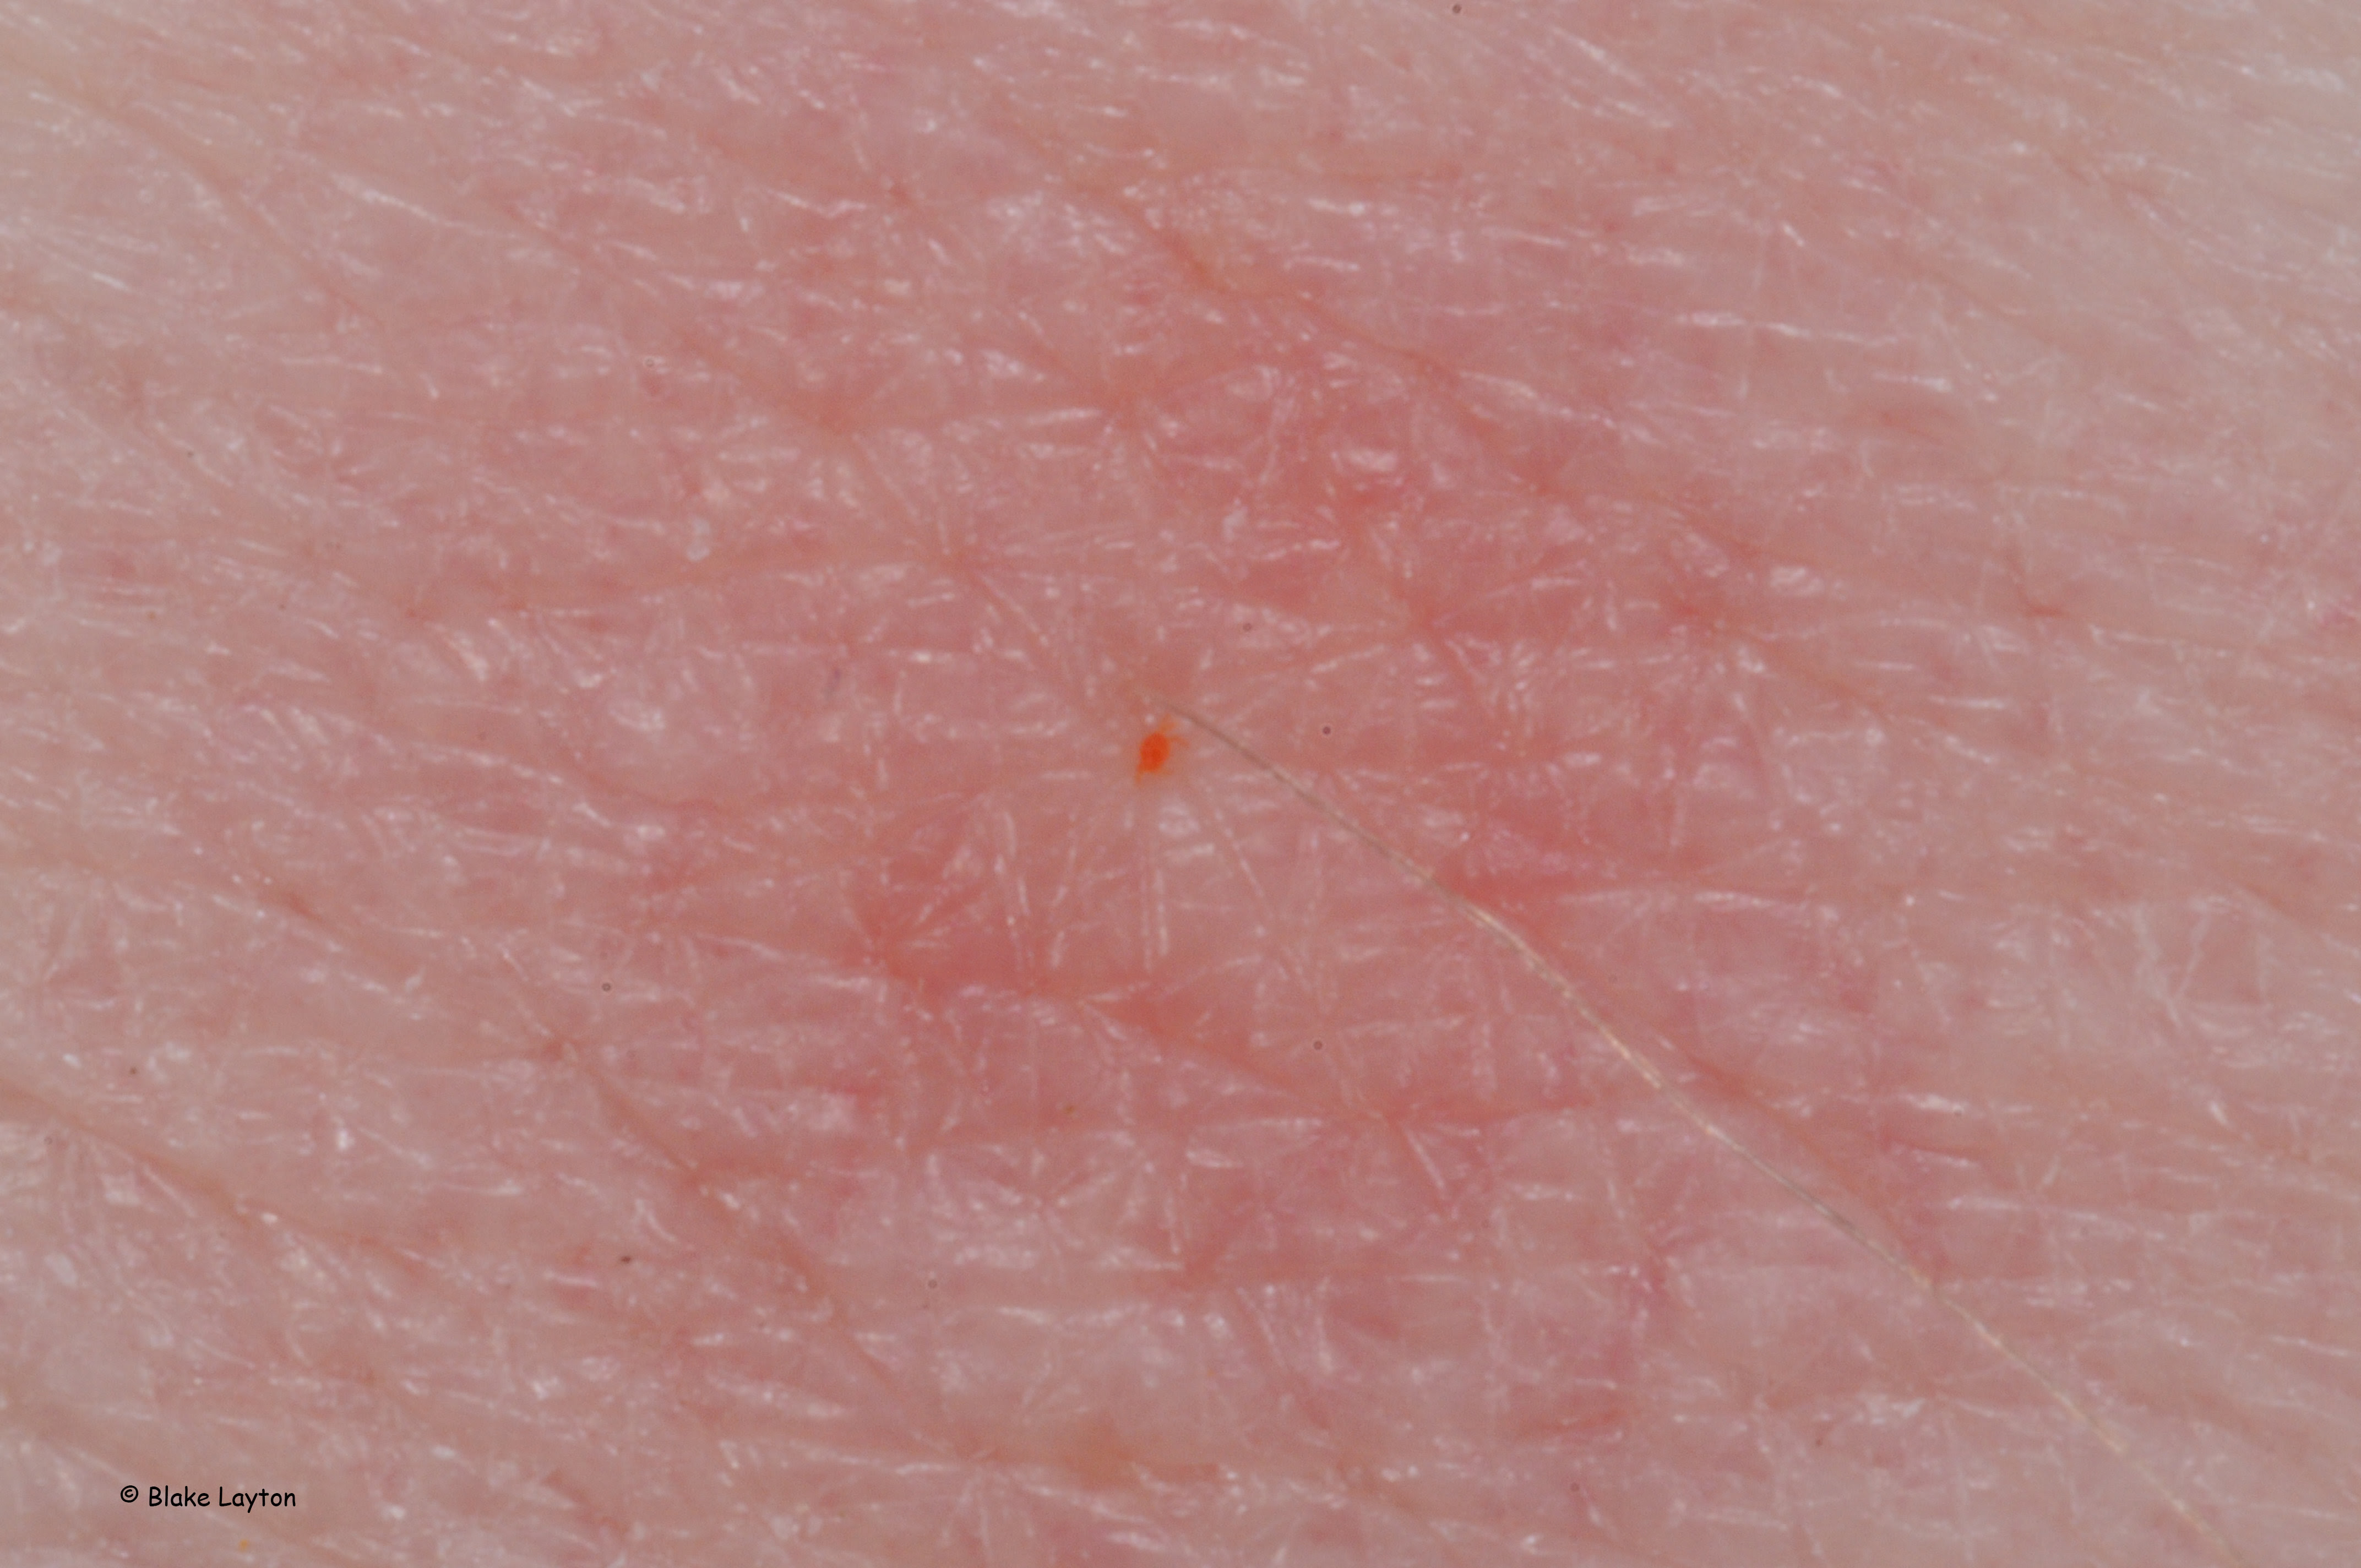 pinpoint red dots on skin turn brown